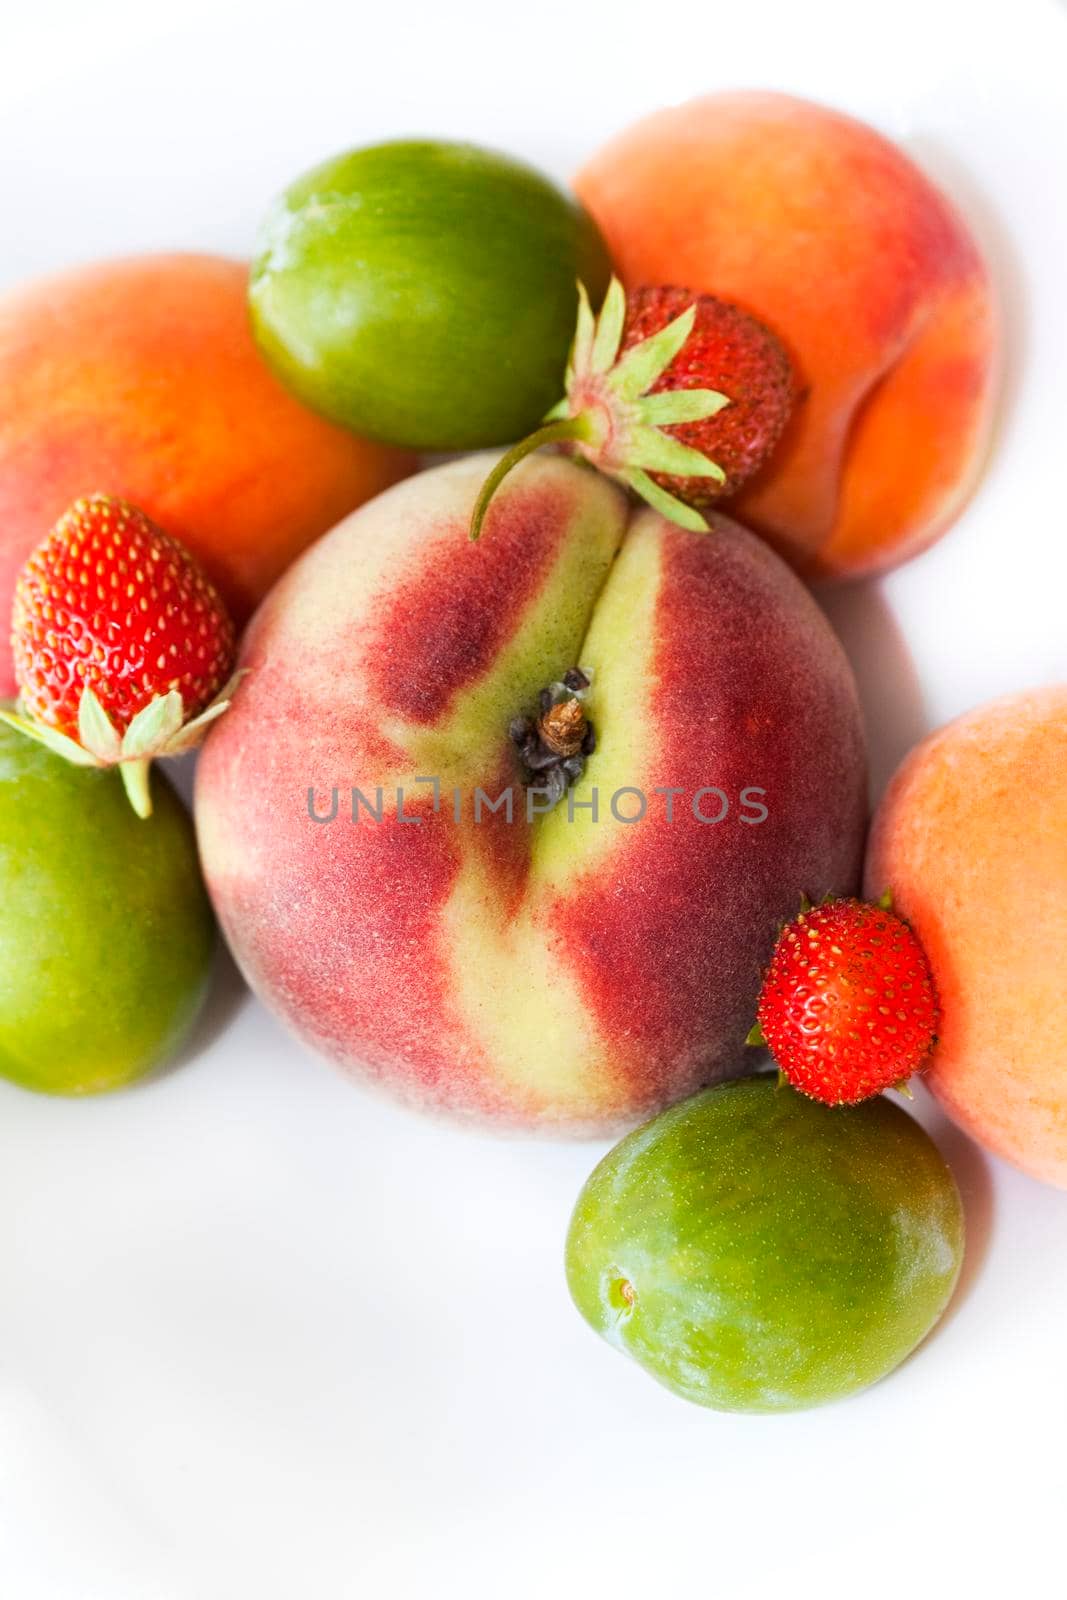 Isolated fruits on a table by jacques_palut